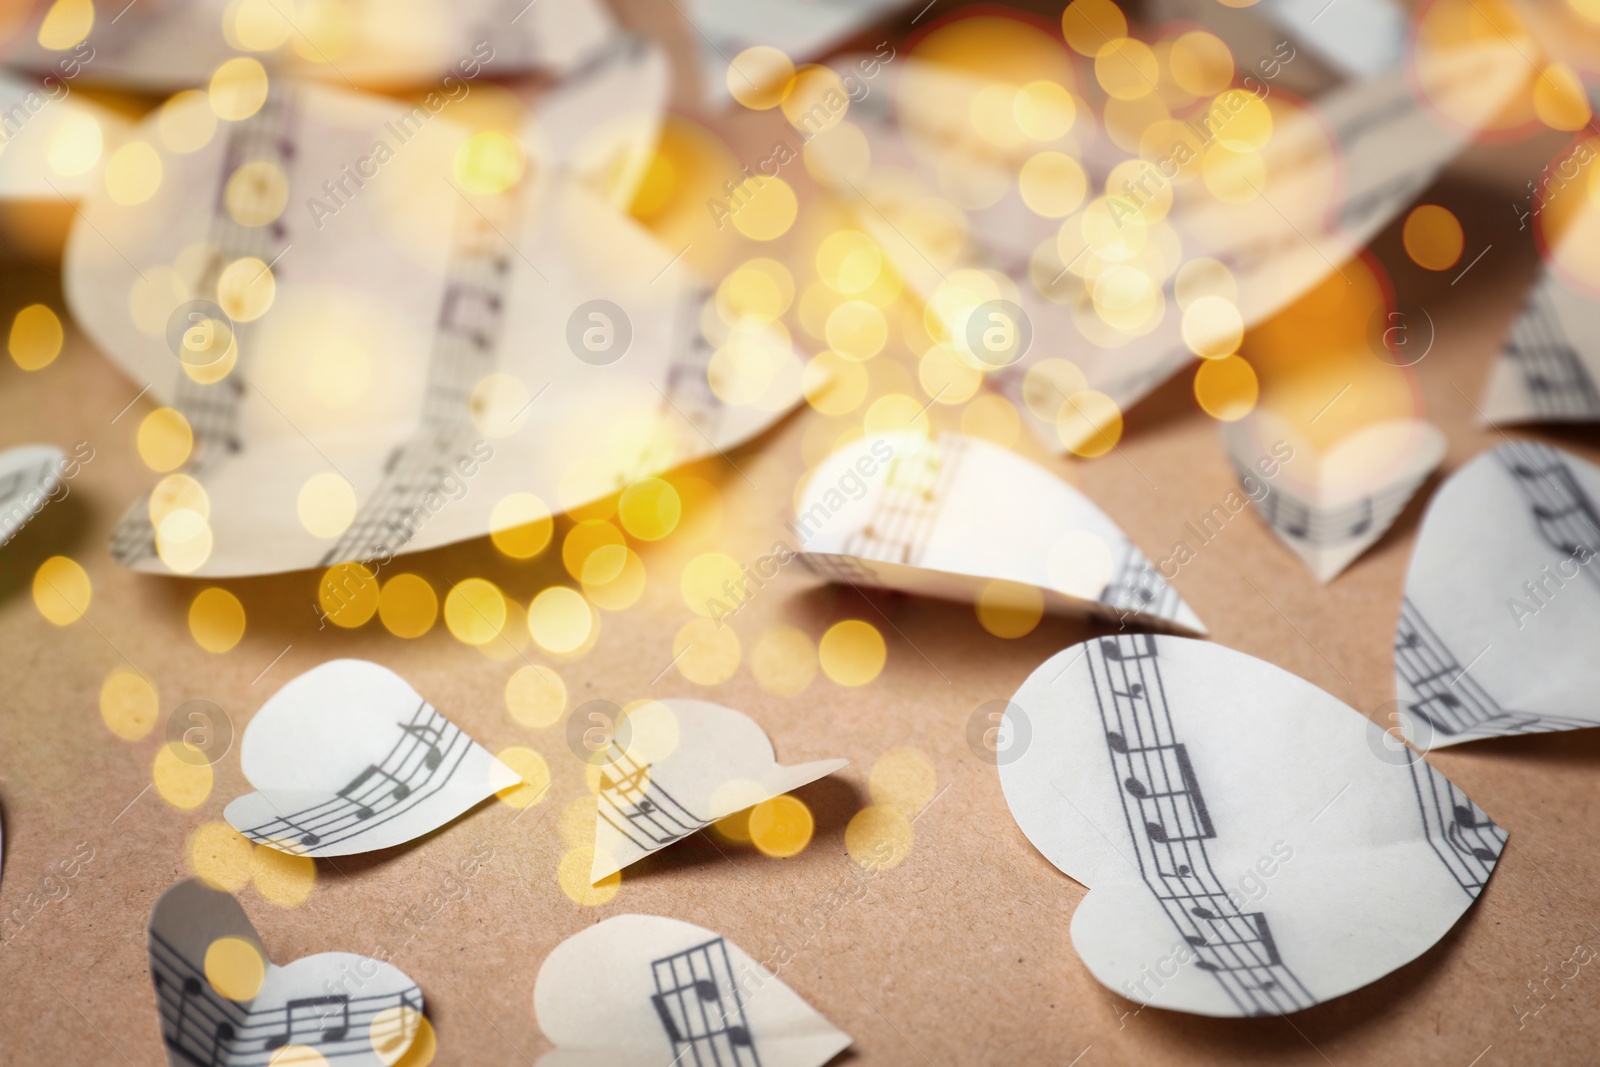 Image of Christmas and New Year music. Hearts cut out from music sheets on wooden background, bokeh effect